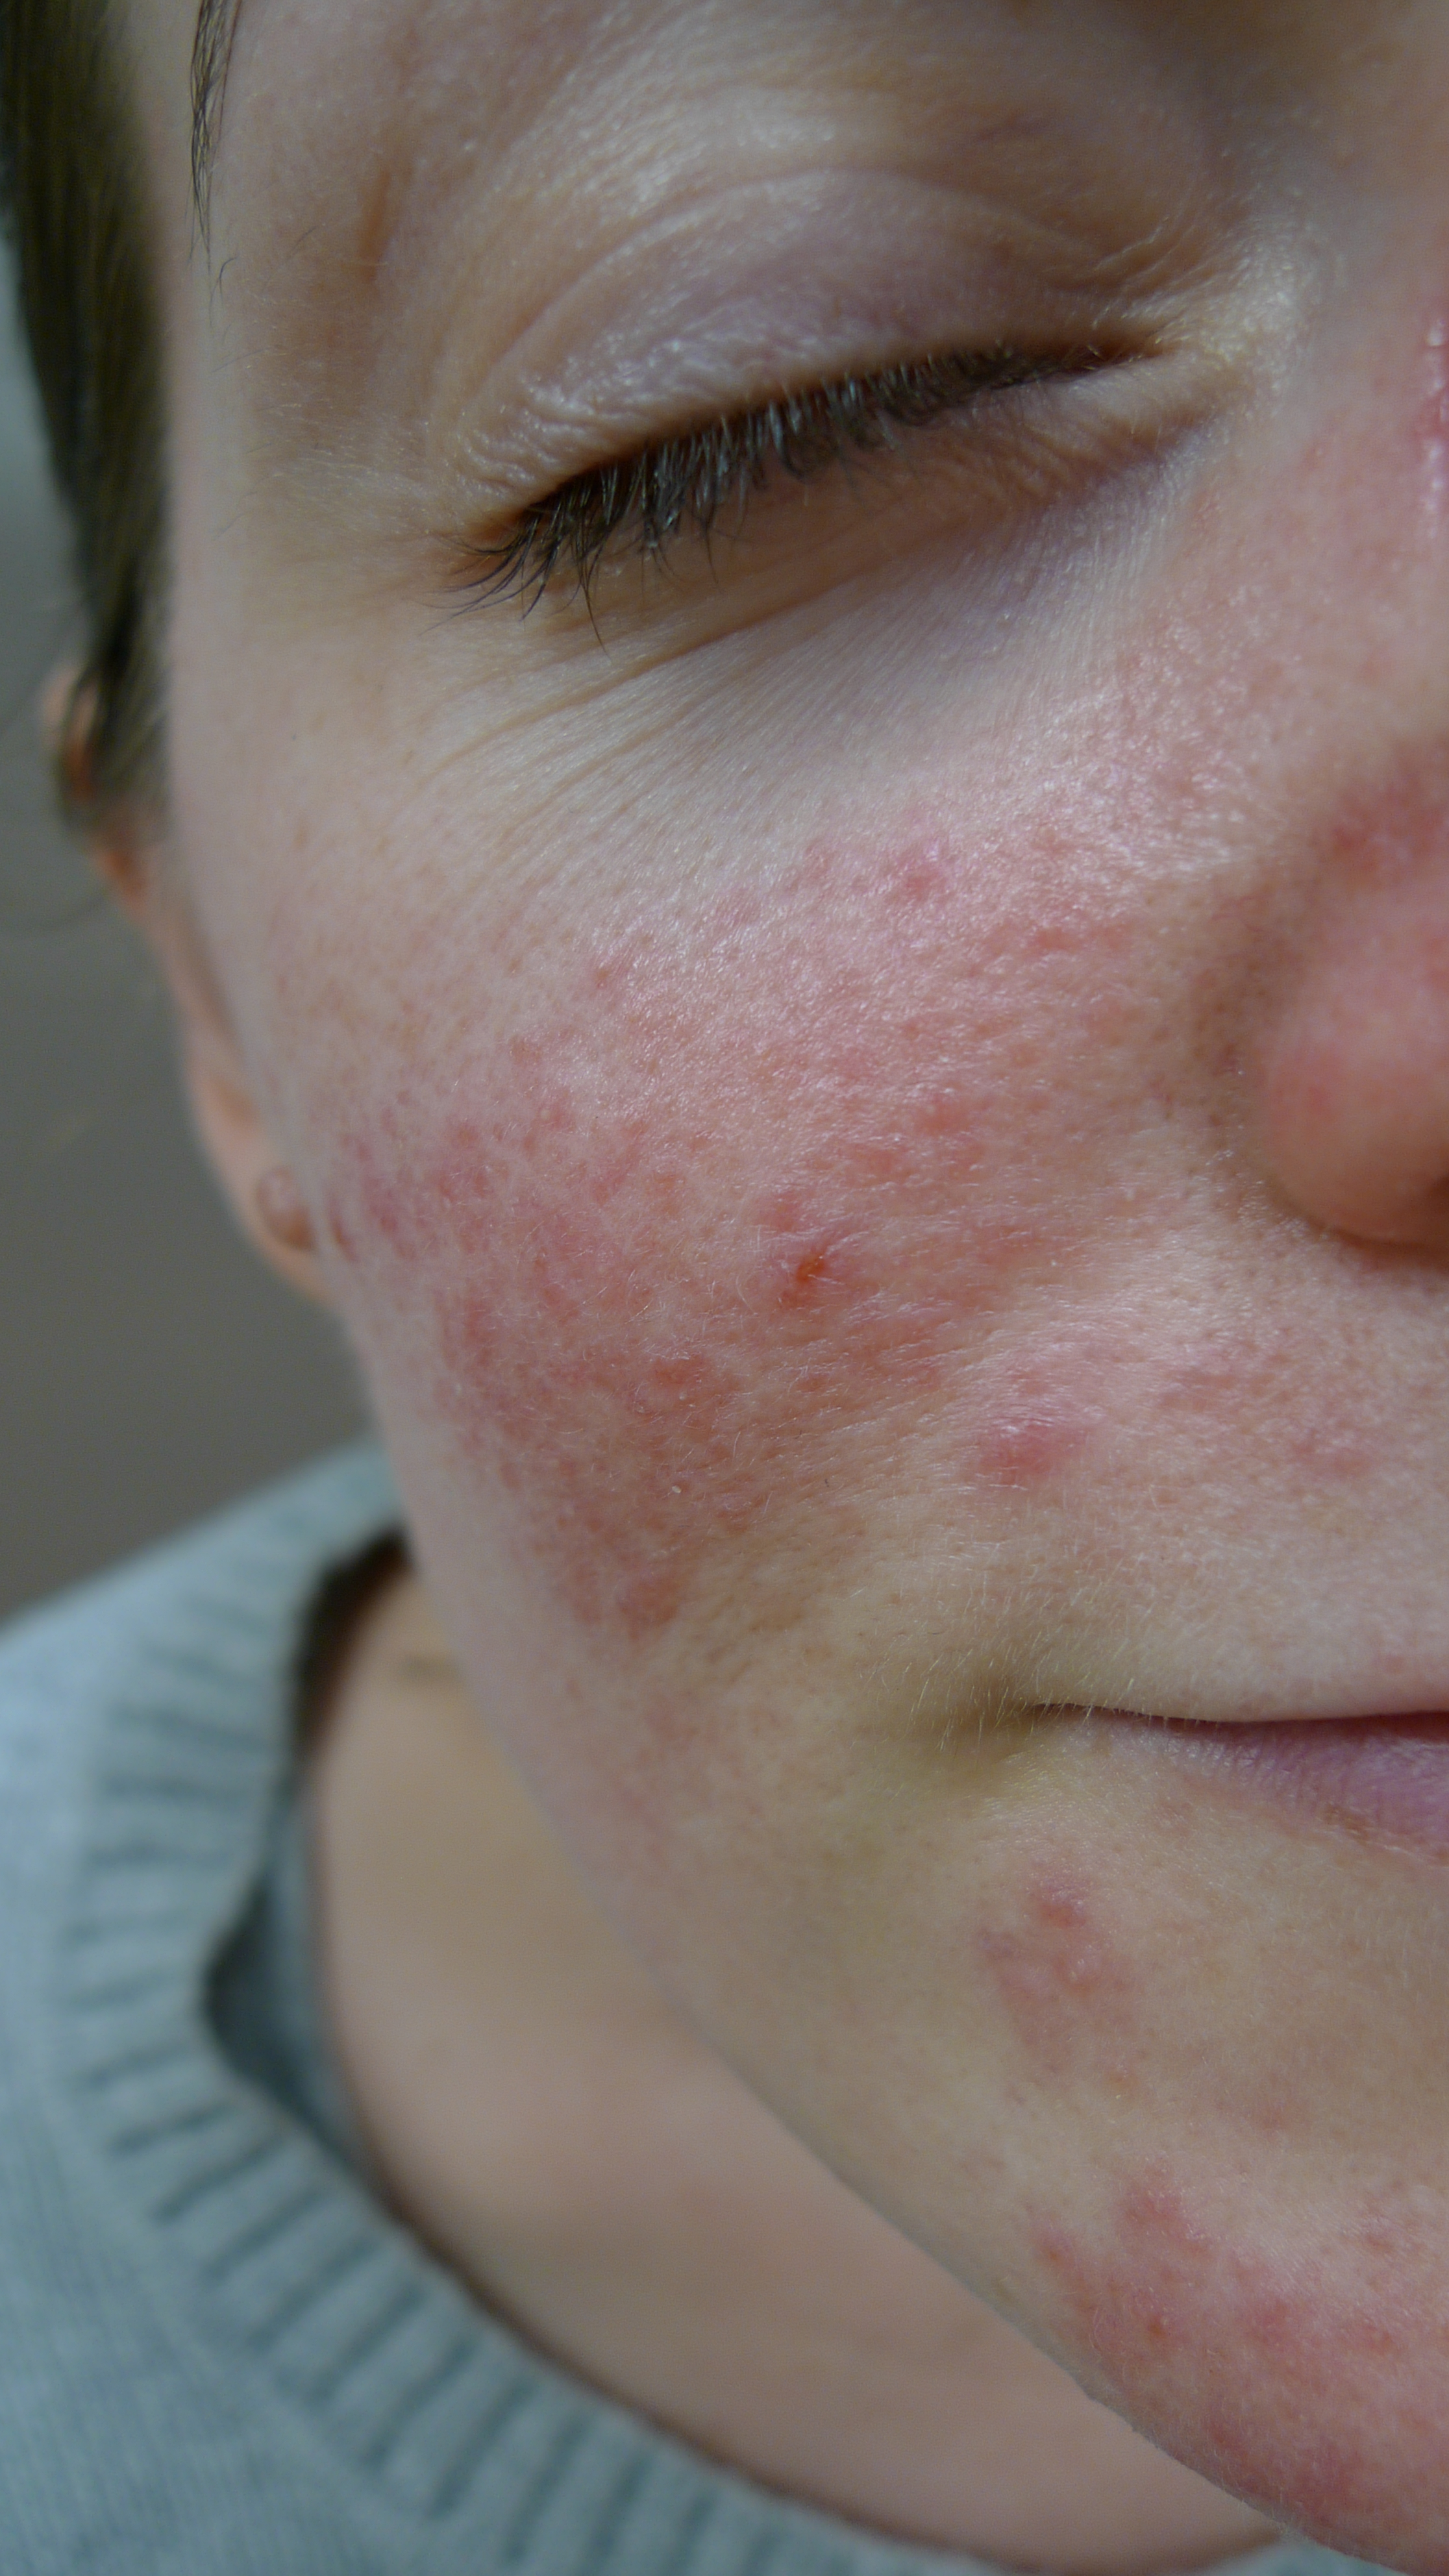 rosacea Image reproduced with permission of Dr Davin Lim